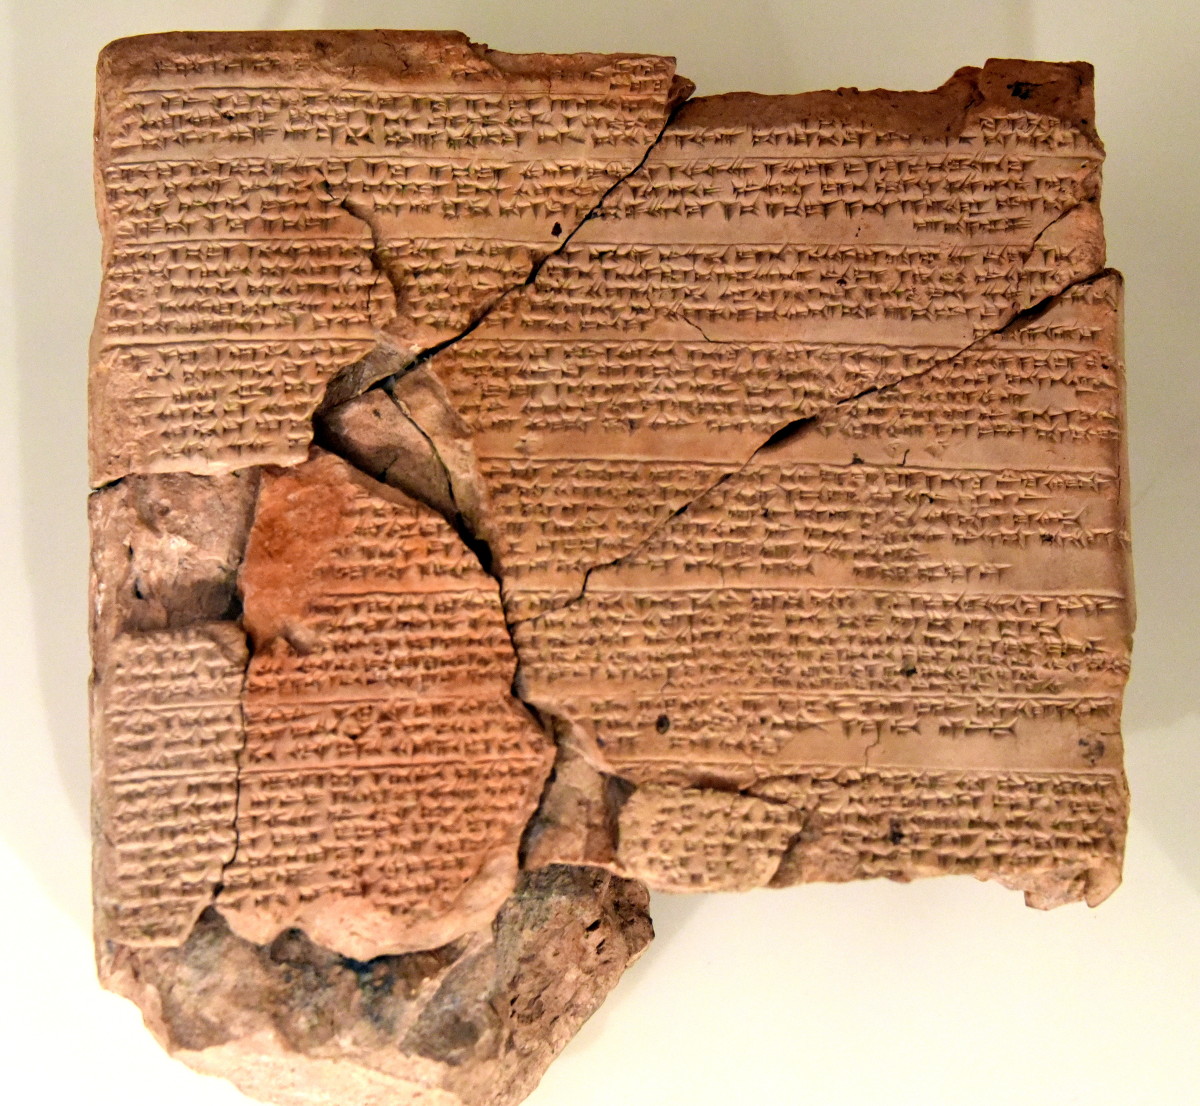 The clay tablet containing the peace treaty between the Hittites and Egypt; the world's earliest recorded peace treaty.